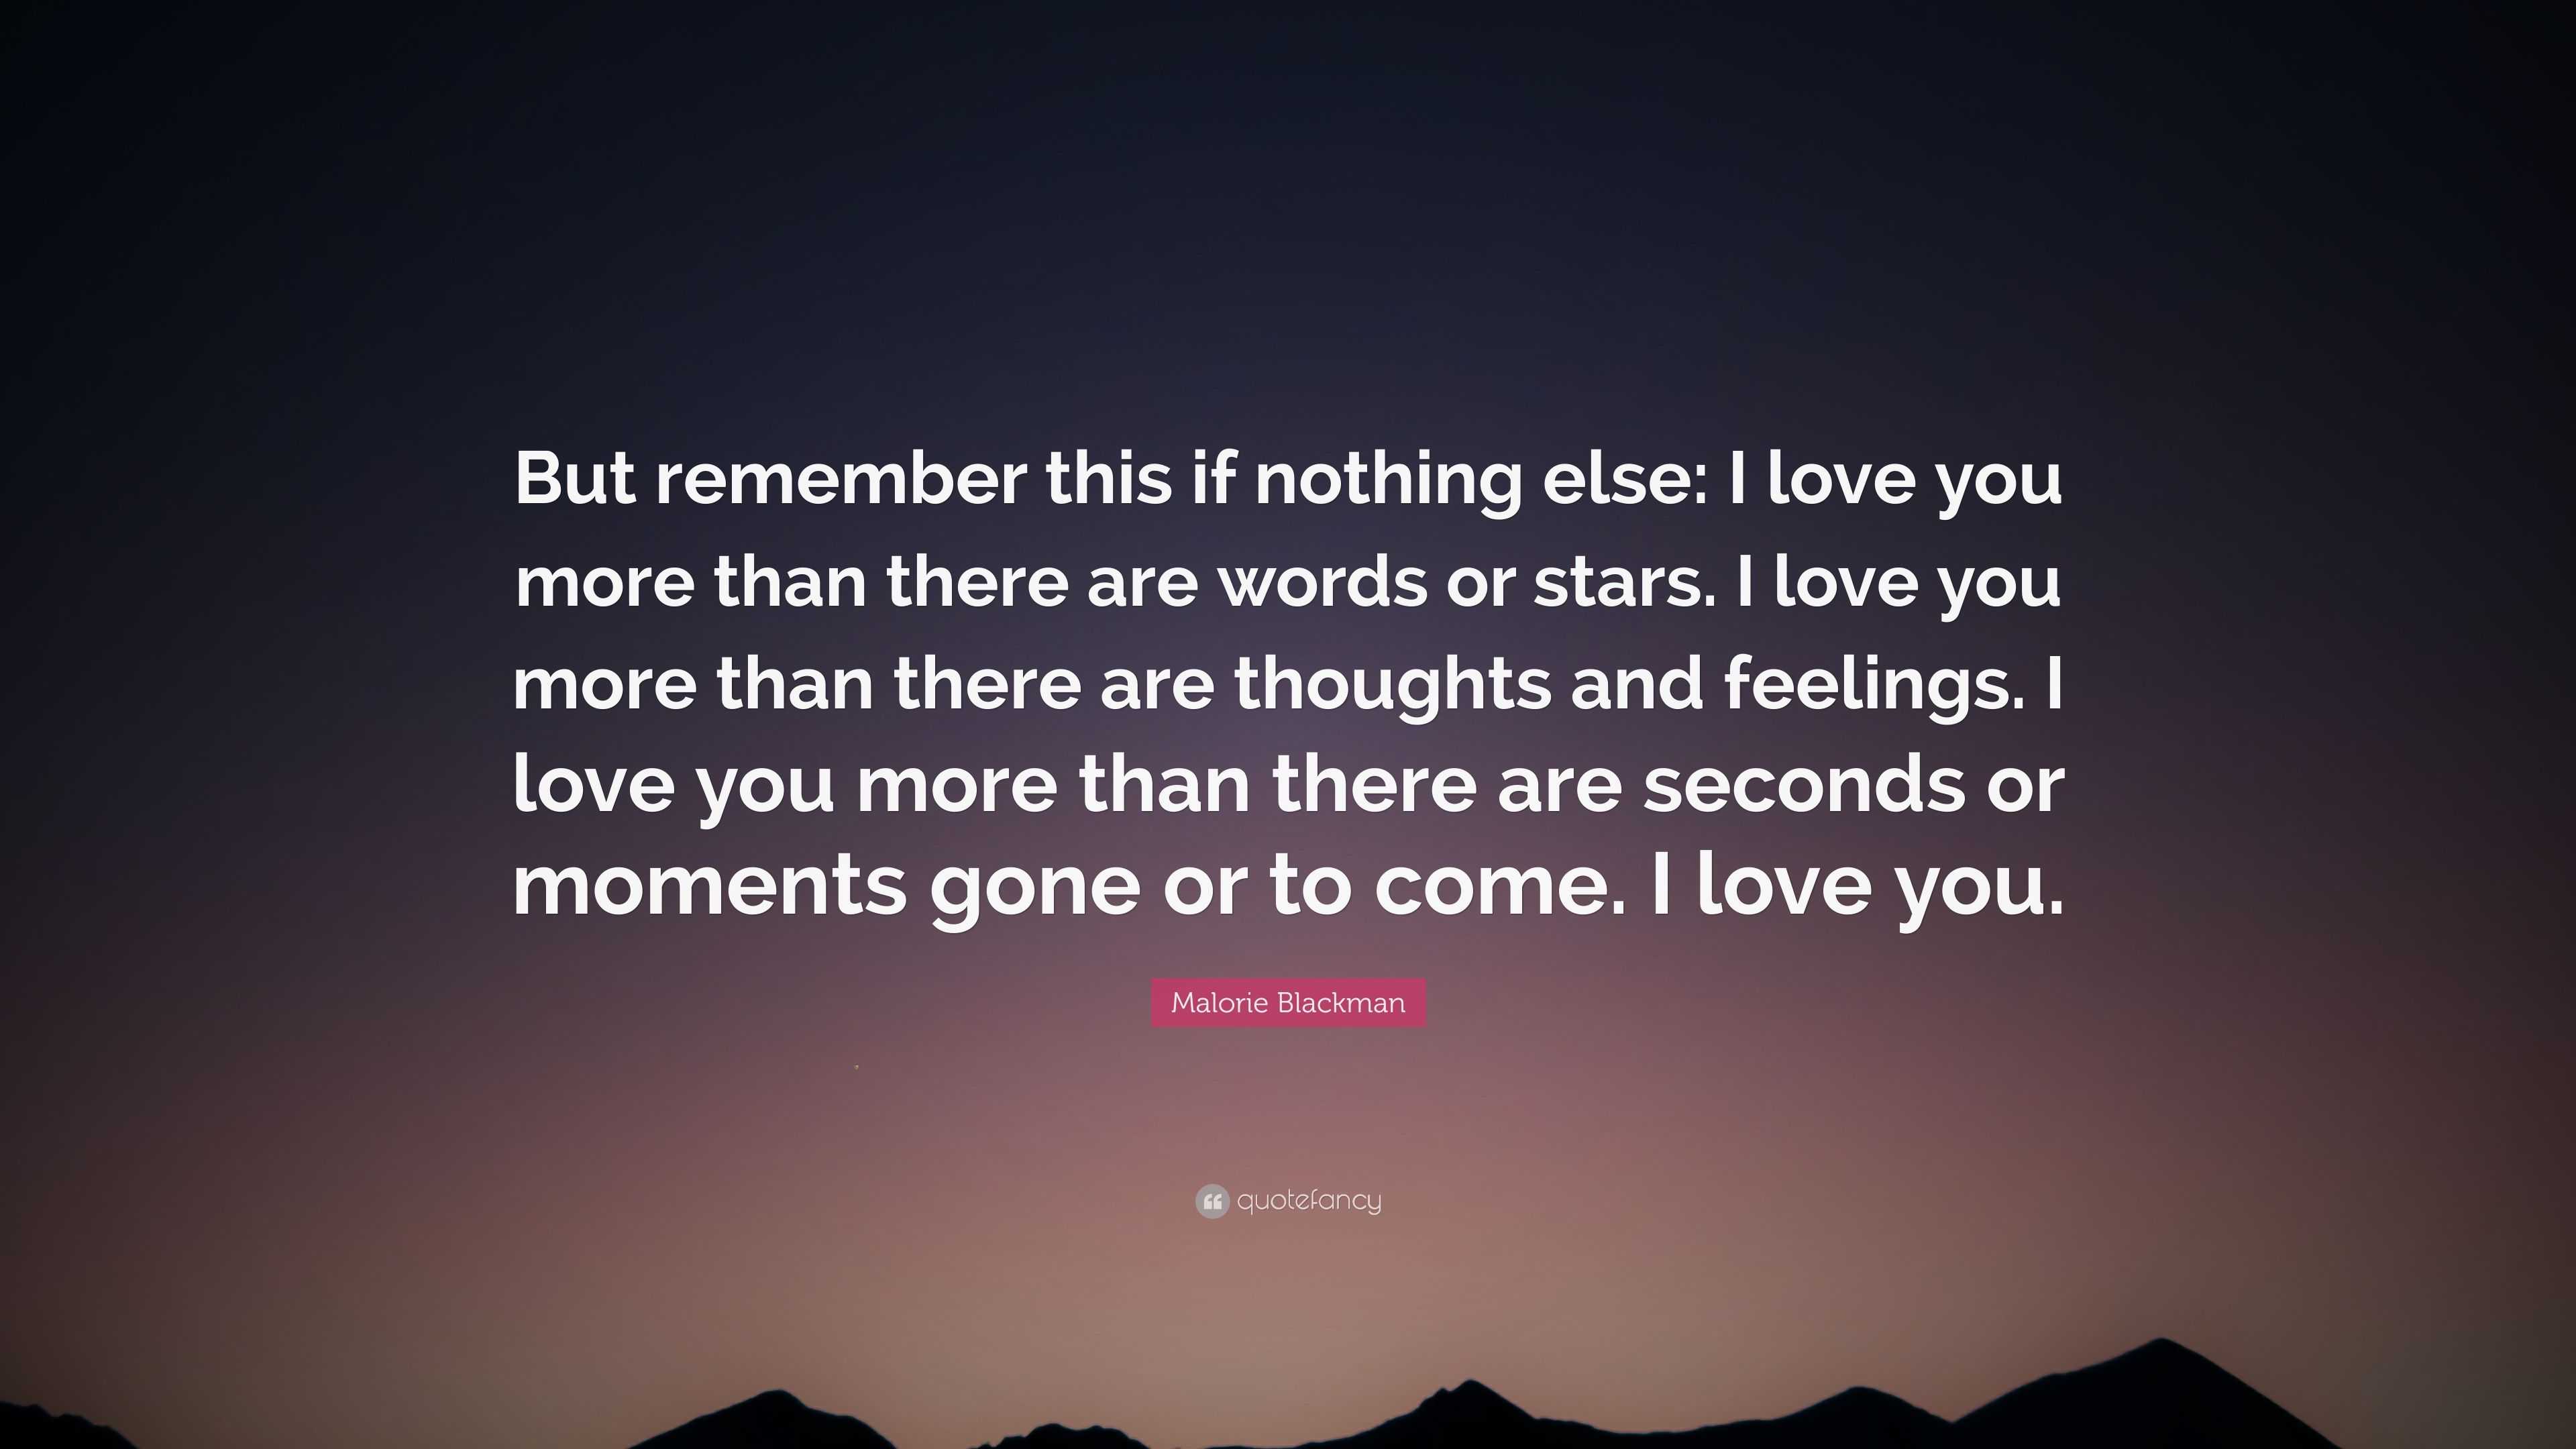 Malorie Blackman Quote “But remember this if nothing else I love you more